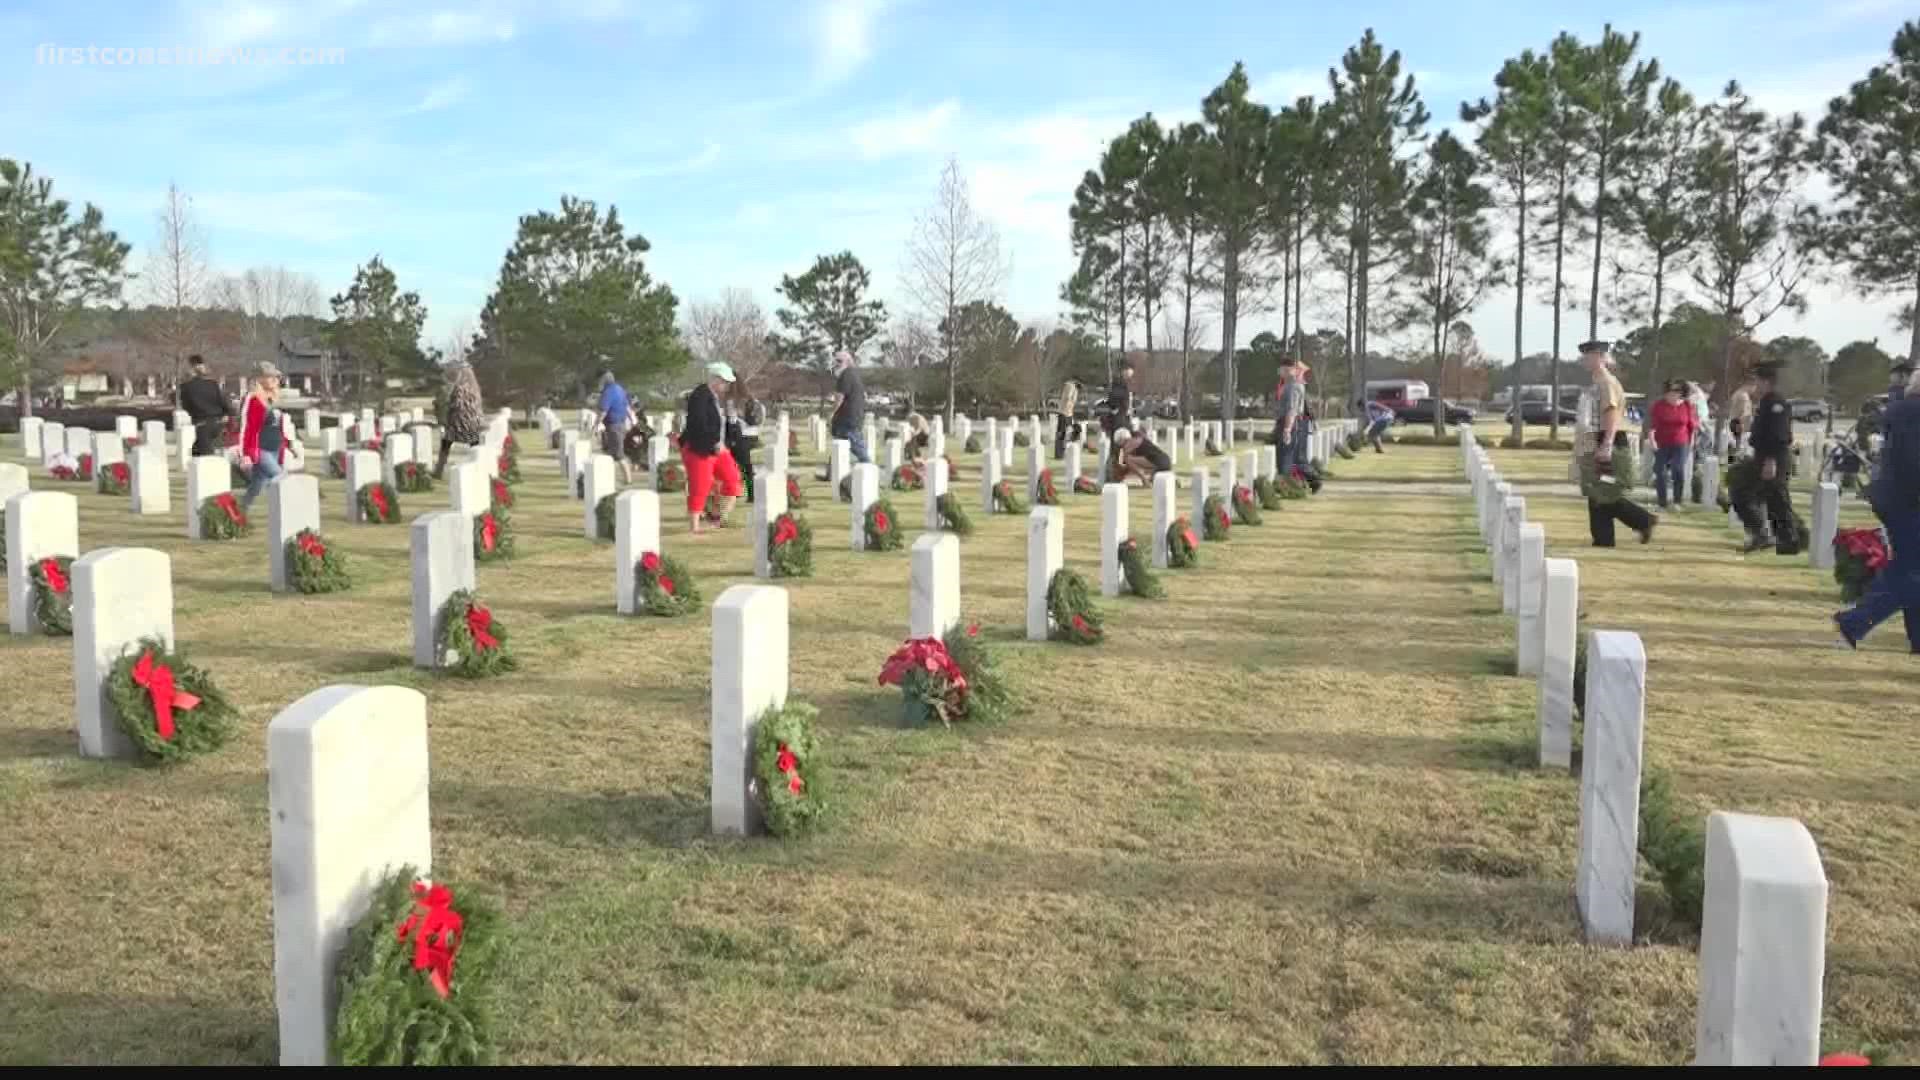 The Jacksonville National Cemetery was one of over 3,000 cemeteries where events took place for ‘Wreaths Across America Day.'